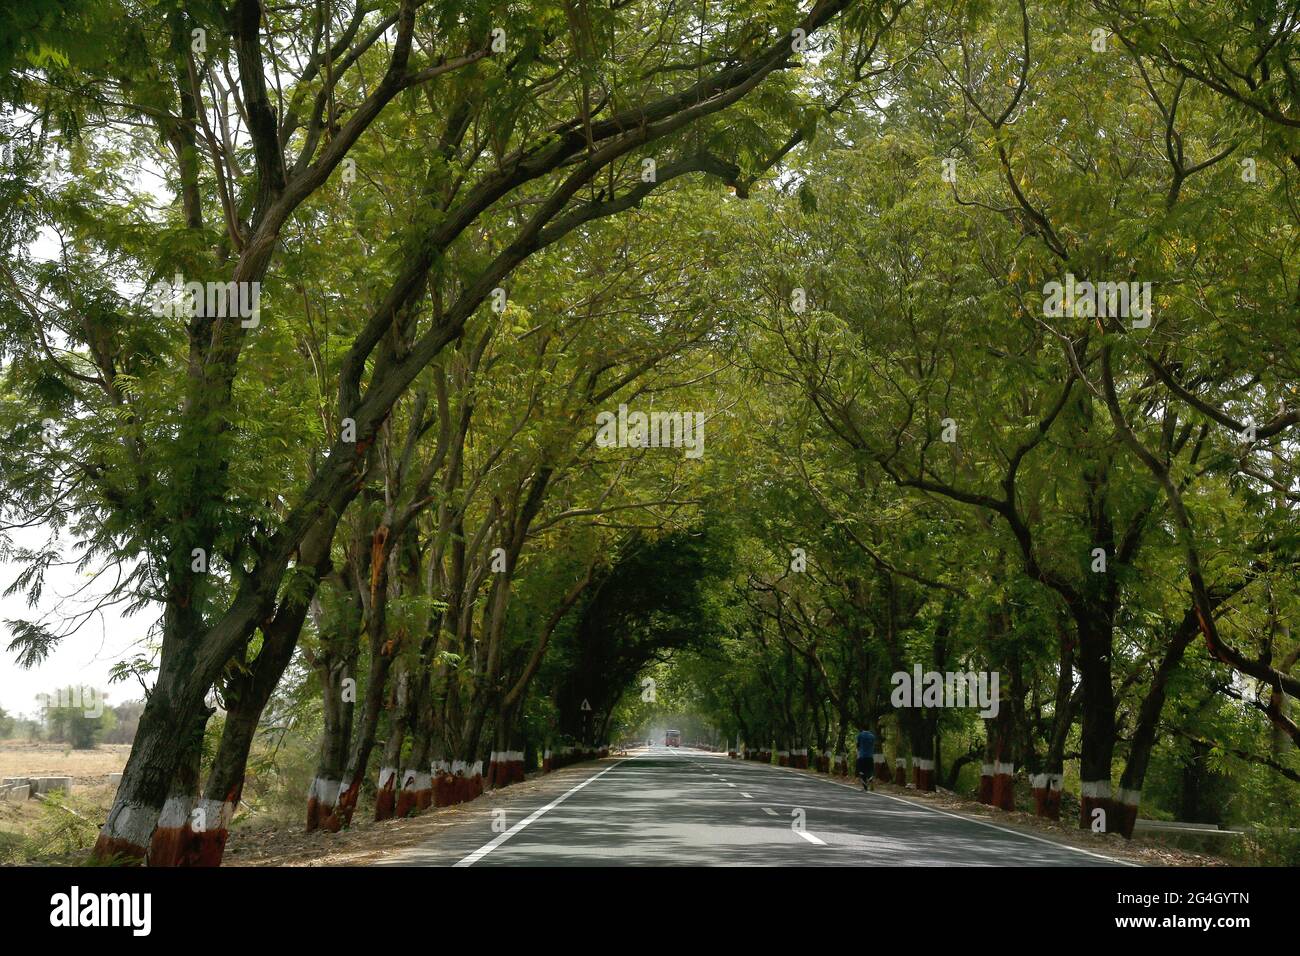 Ahmedabad to Vadodara expressway with canopy of trees on both sides Stock Photo